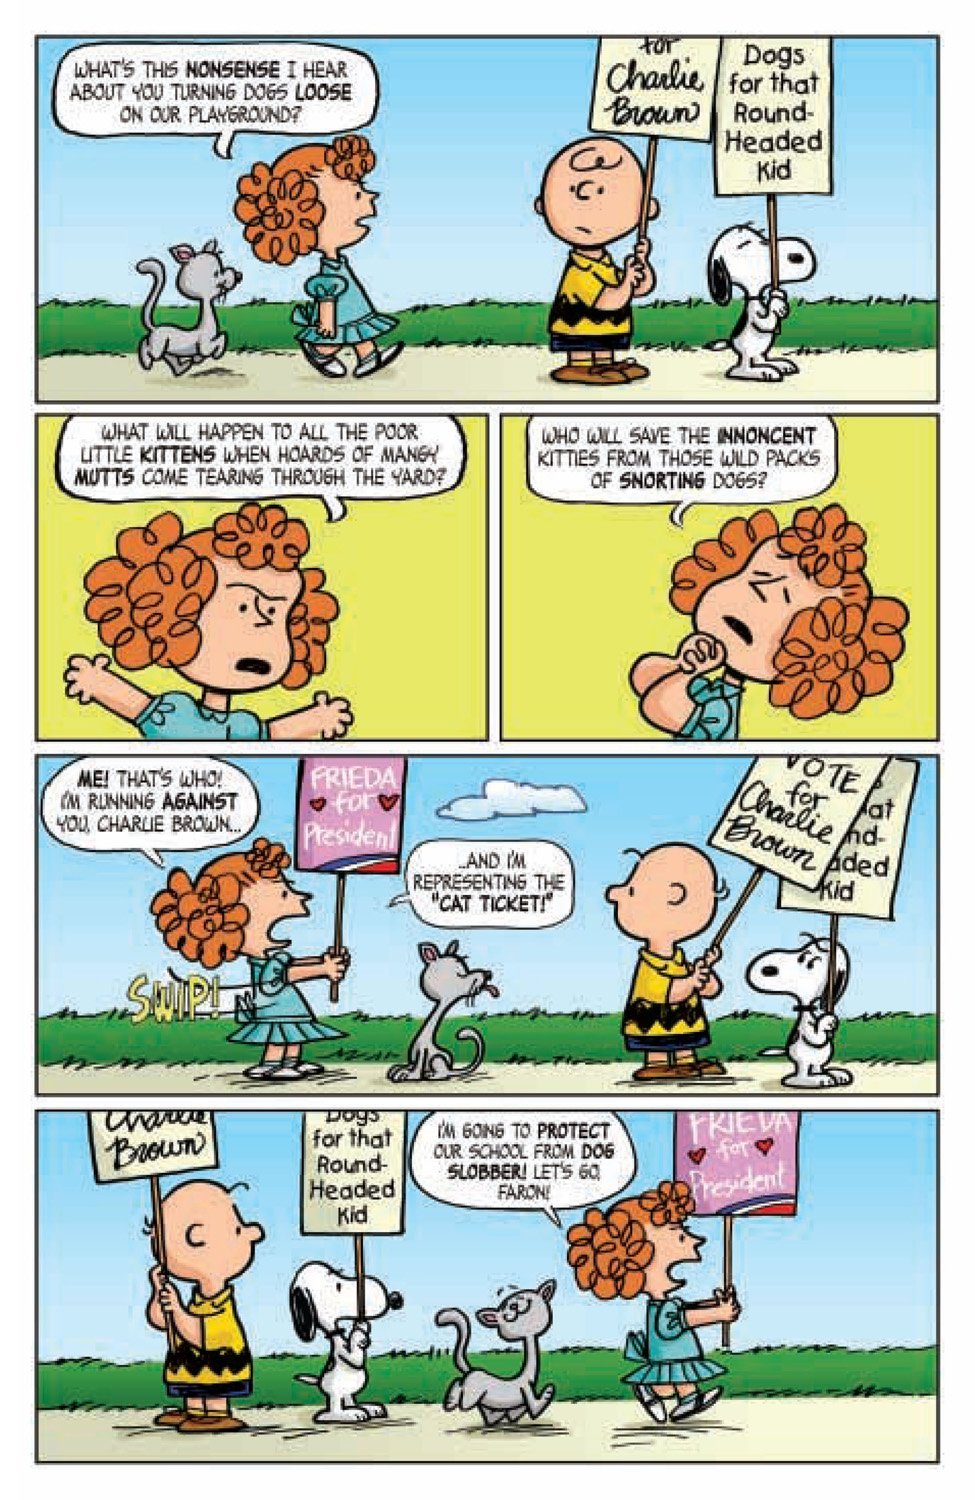 Snazz reccomend Comic strip peanuts is named after